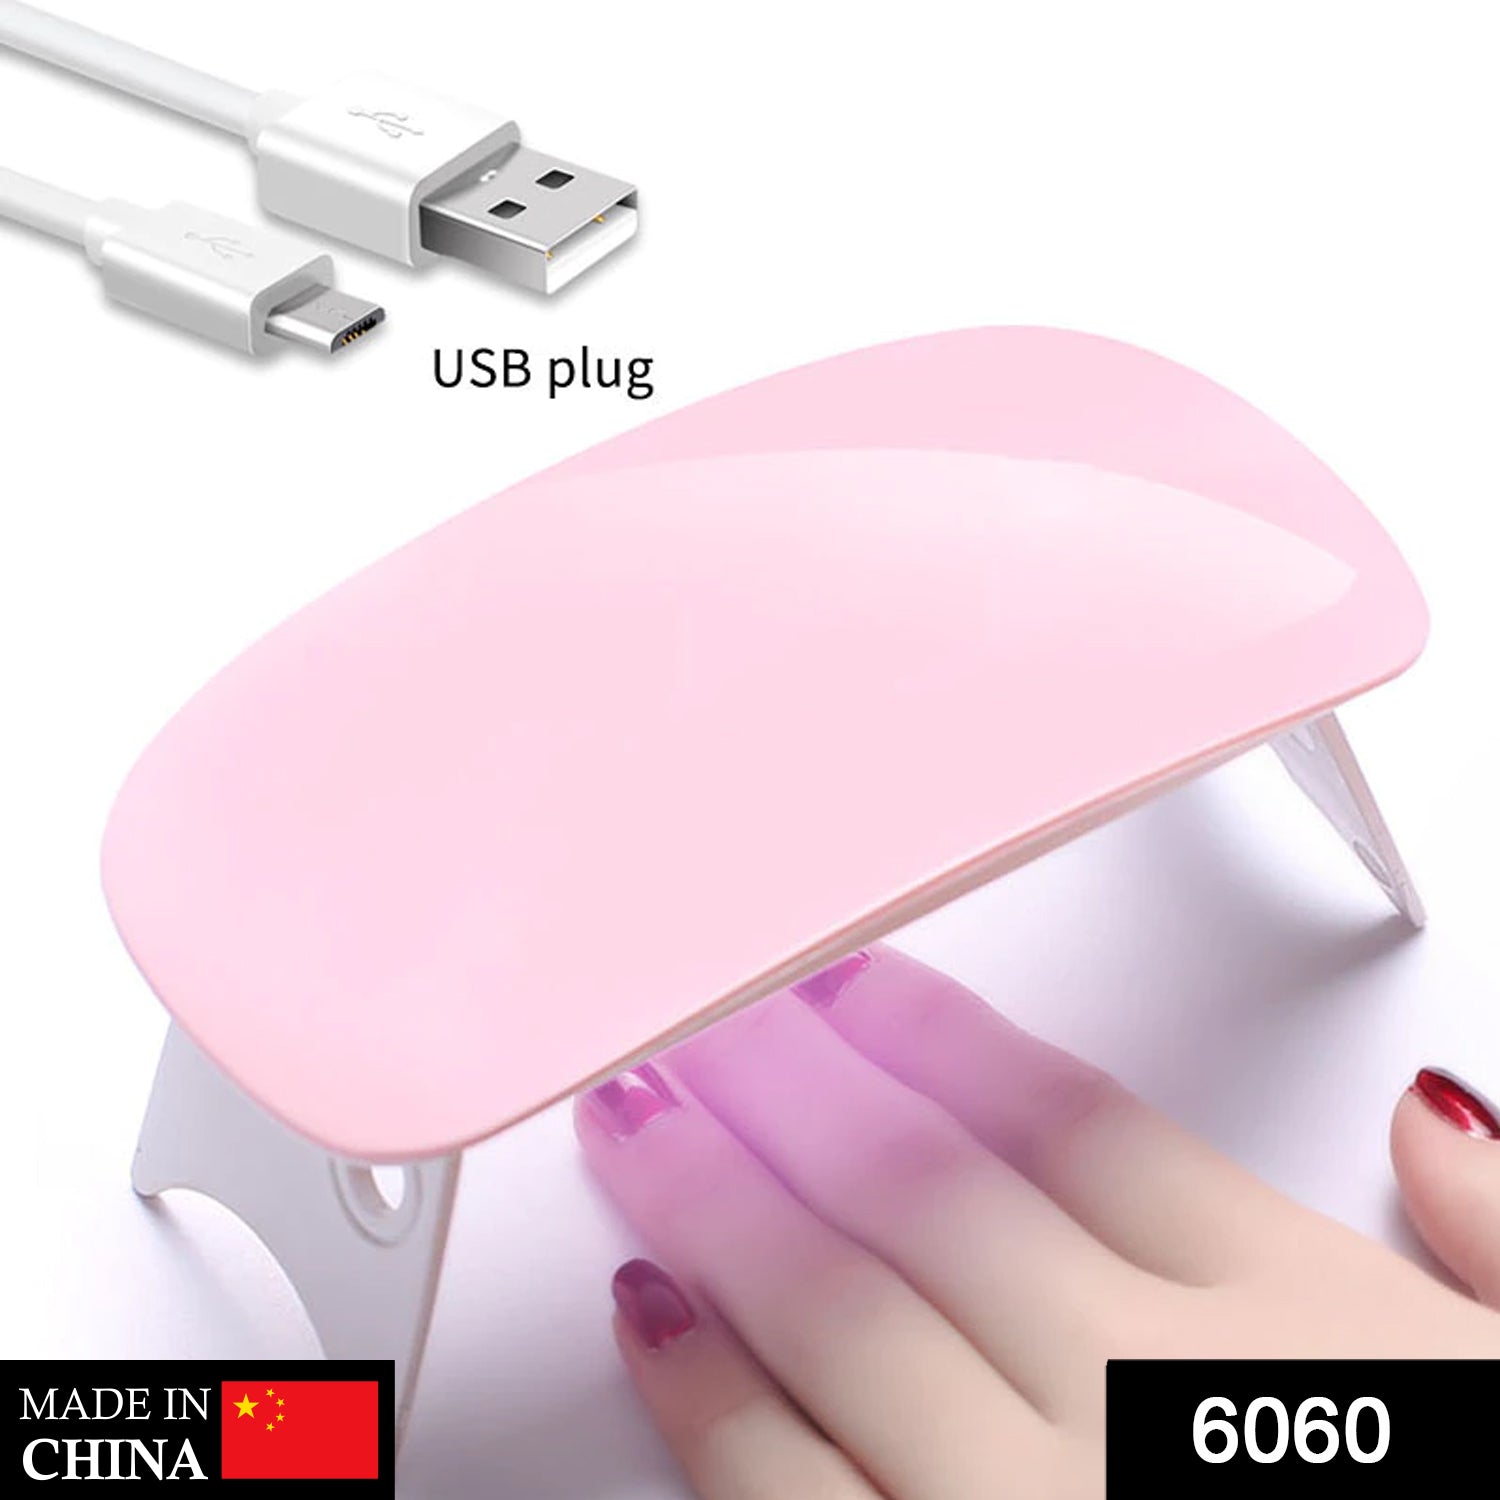 Buy Navaliya Nail Paint Dryer With USB/Nail Polish Dryer/LED UV Light Nail  Polish Dryer Curing Lamp Light Portable/Lamp cures fingernails or toenails/Nails  Paints Dryer Machine Online at Low Prices in India -